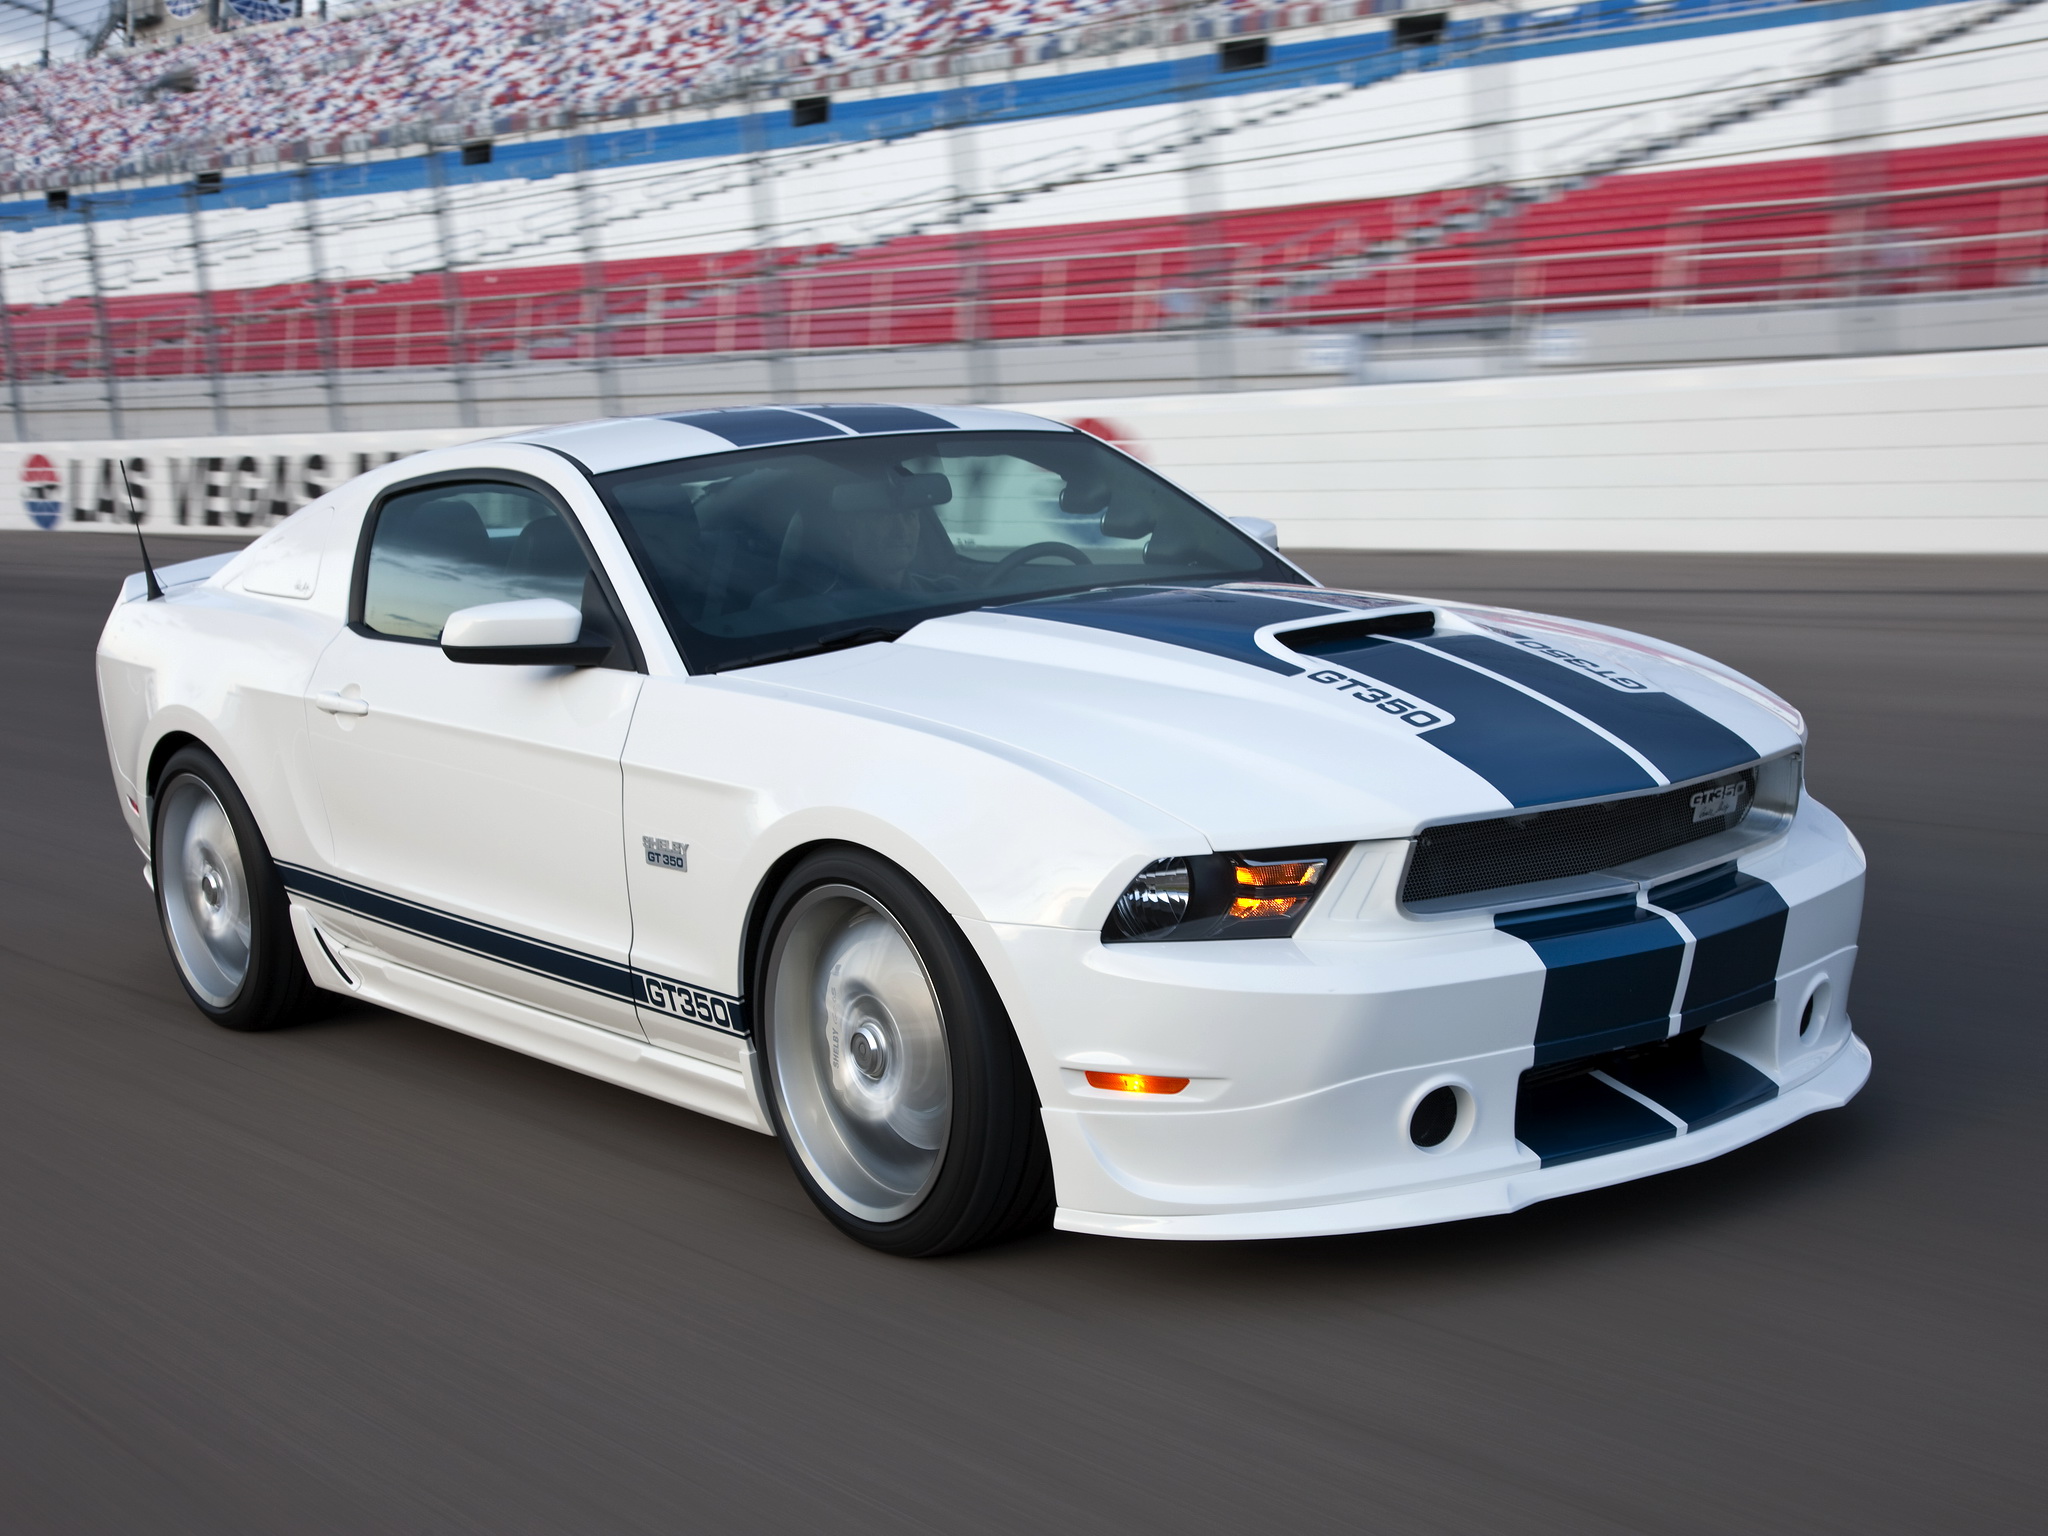 2010, Shelby, Gt350, Ford, Mustang, Muscle Wallpaper